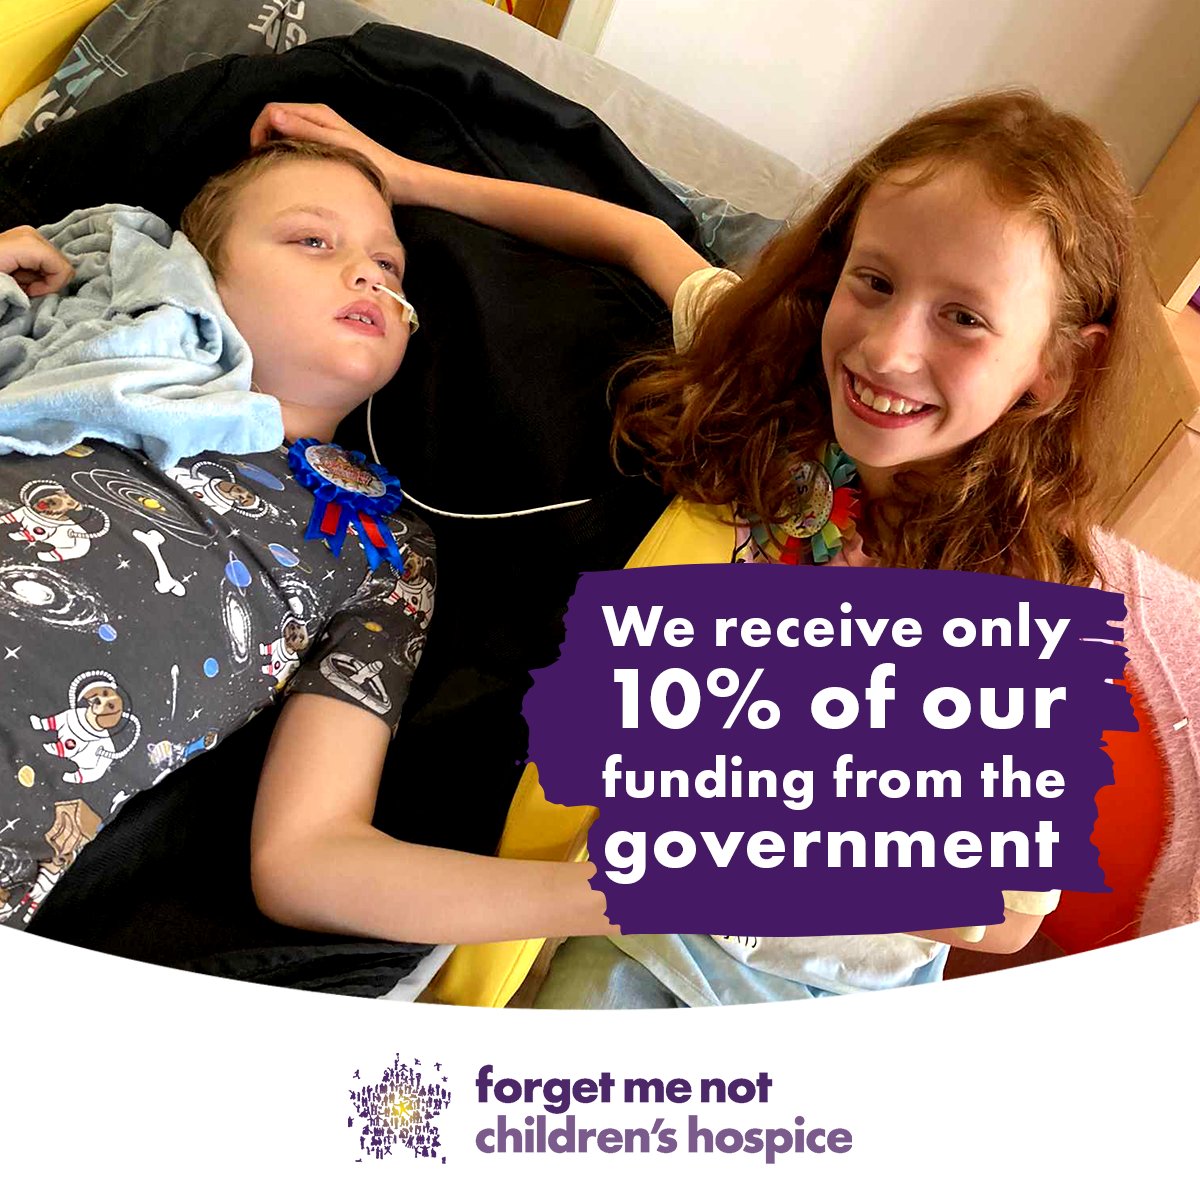 Thank you everyone who has donated to us since seeing us on BBC News on Monday night. Many were shocked to learn that we receive only 10% of funding from the government. For a quick & easy way to support us, find out more at: forgetmenotchild.co.uk/donate